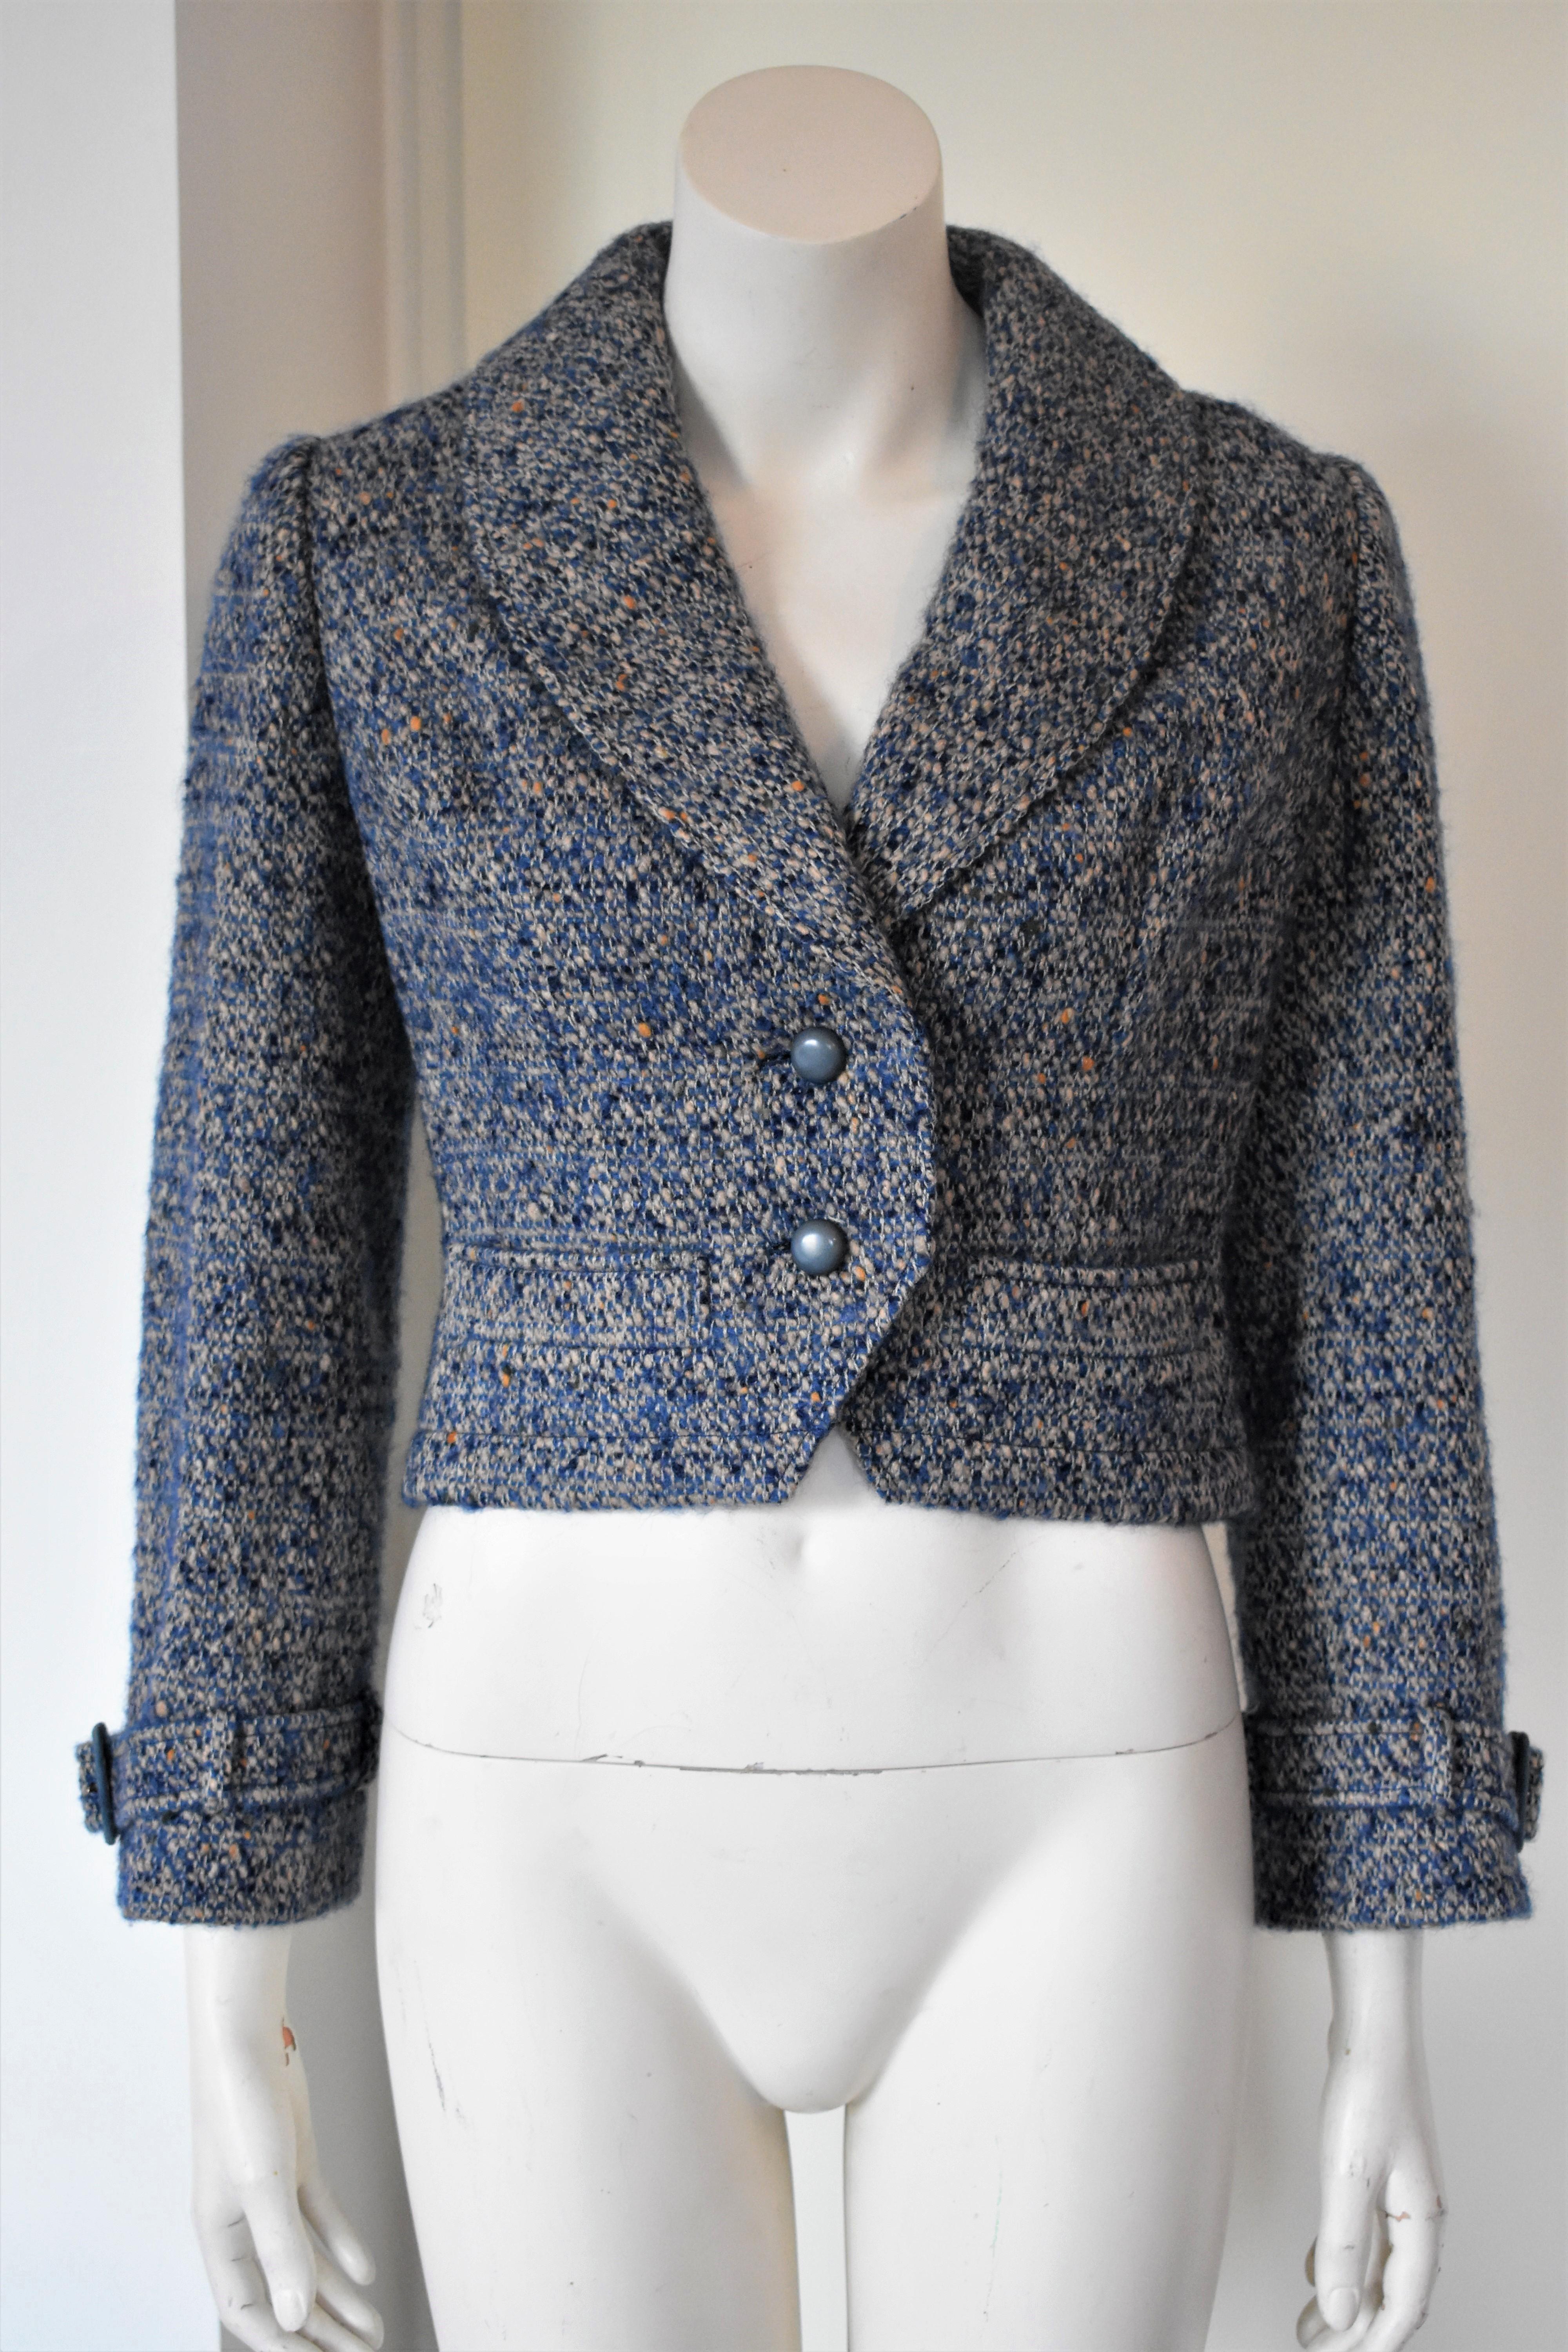 This Christian Dior jacket is a beautiful Haute Couture piece from the 1975 Automne-Hiver collection, numbered 005427. The jacket is made from a soft blend of mohair and wool and it is fully lined with blue silk. The jacket is in an excellent